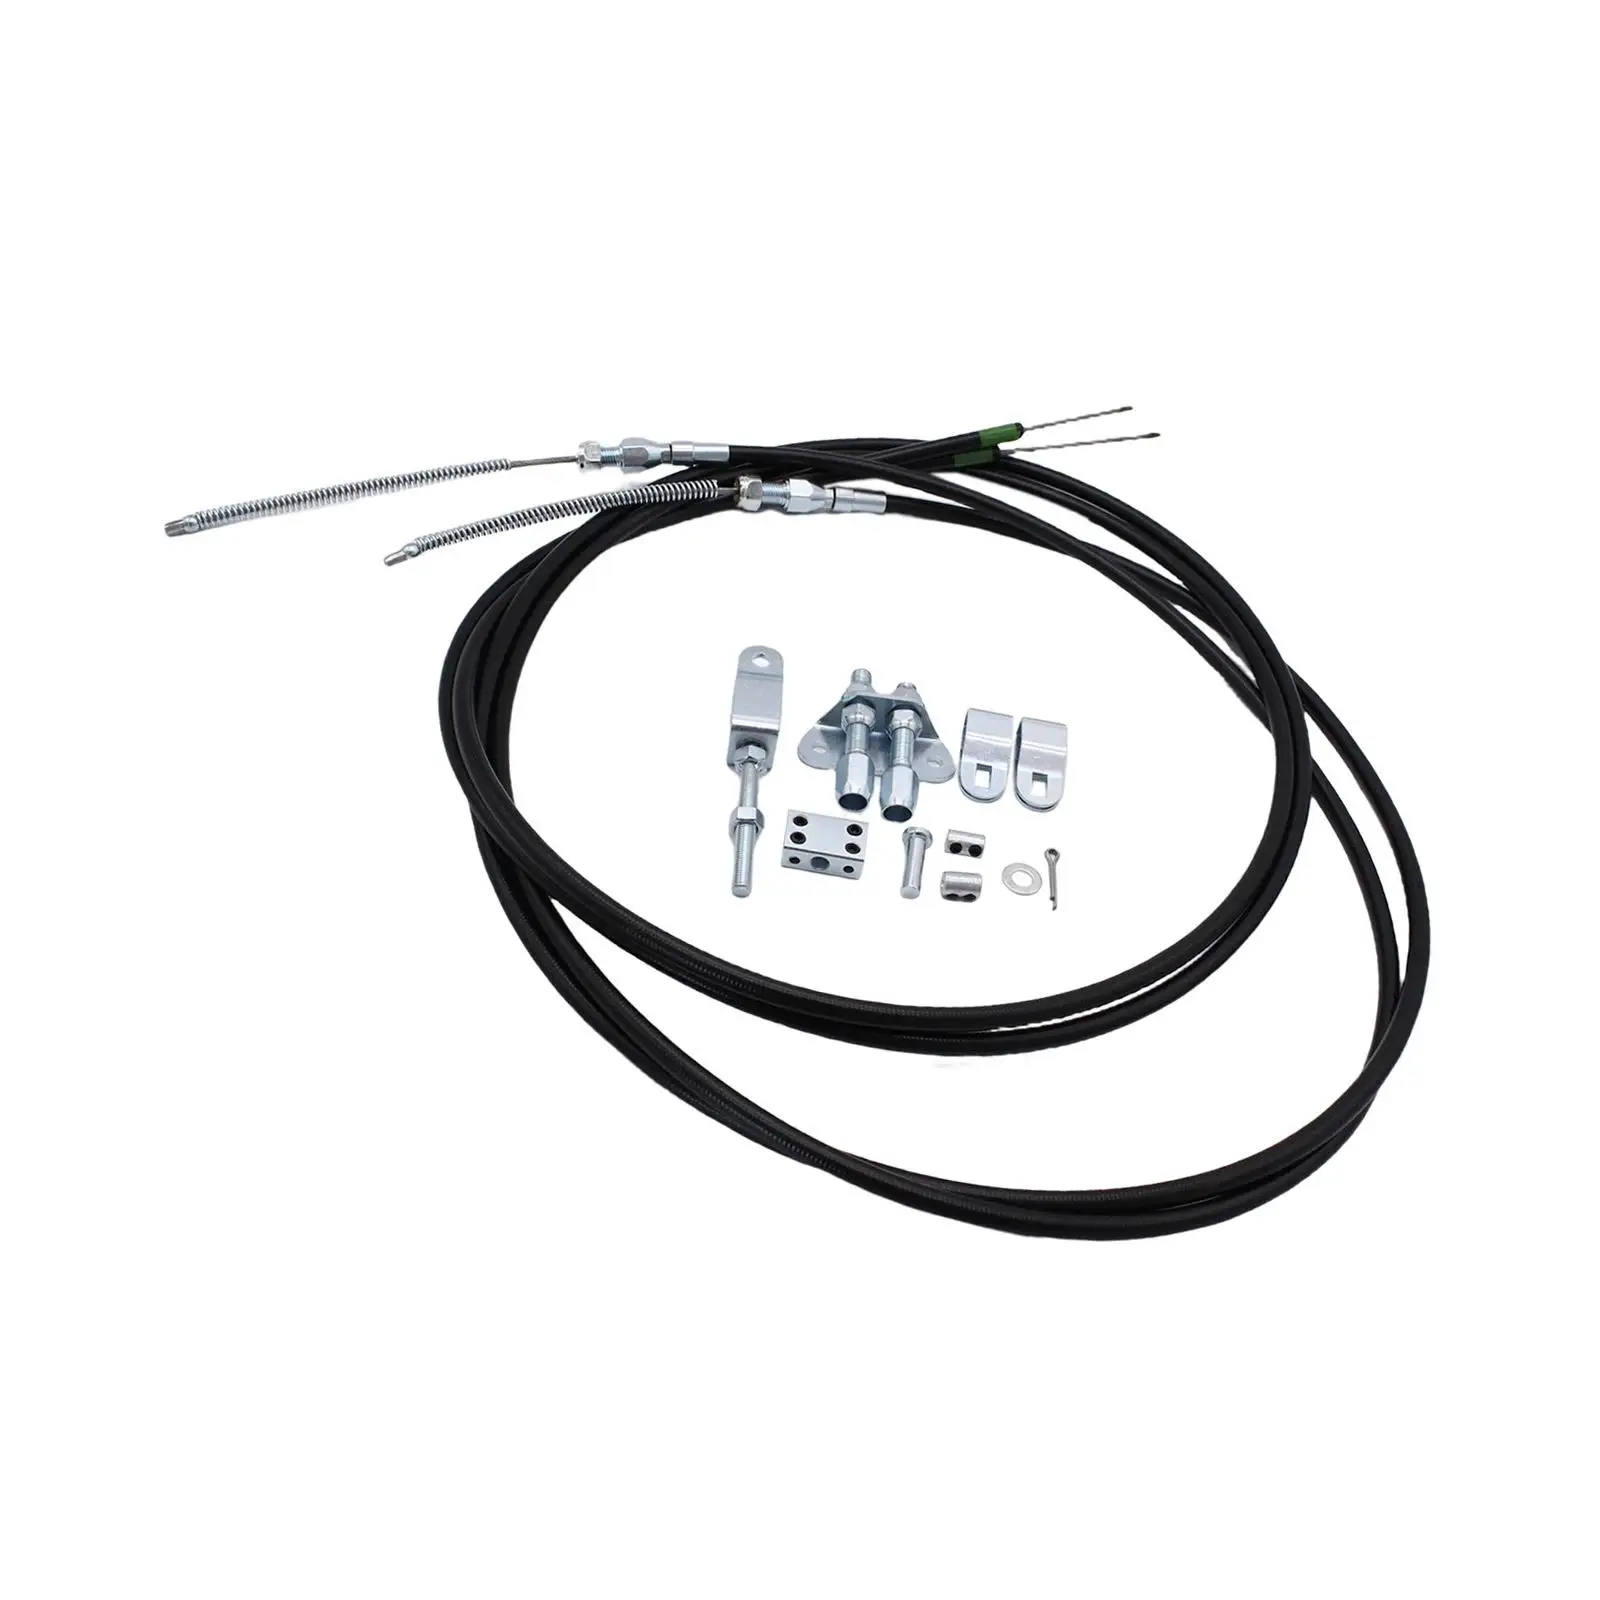 Car Universal Parking Brake Cable Kit 330-9371 Replaces Spare Parts Sturdy Durable for Internal Drum Brake Assemblies Adjustable